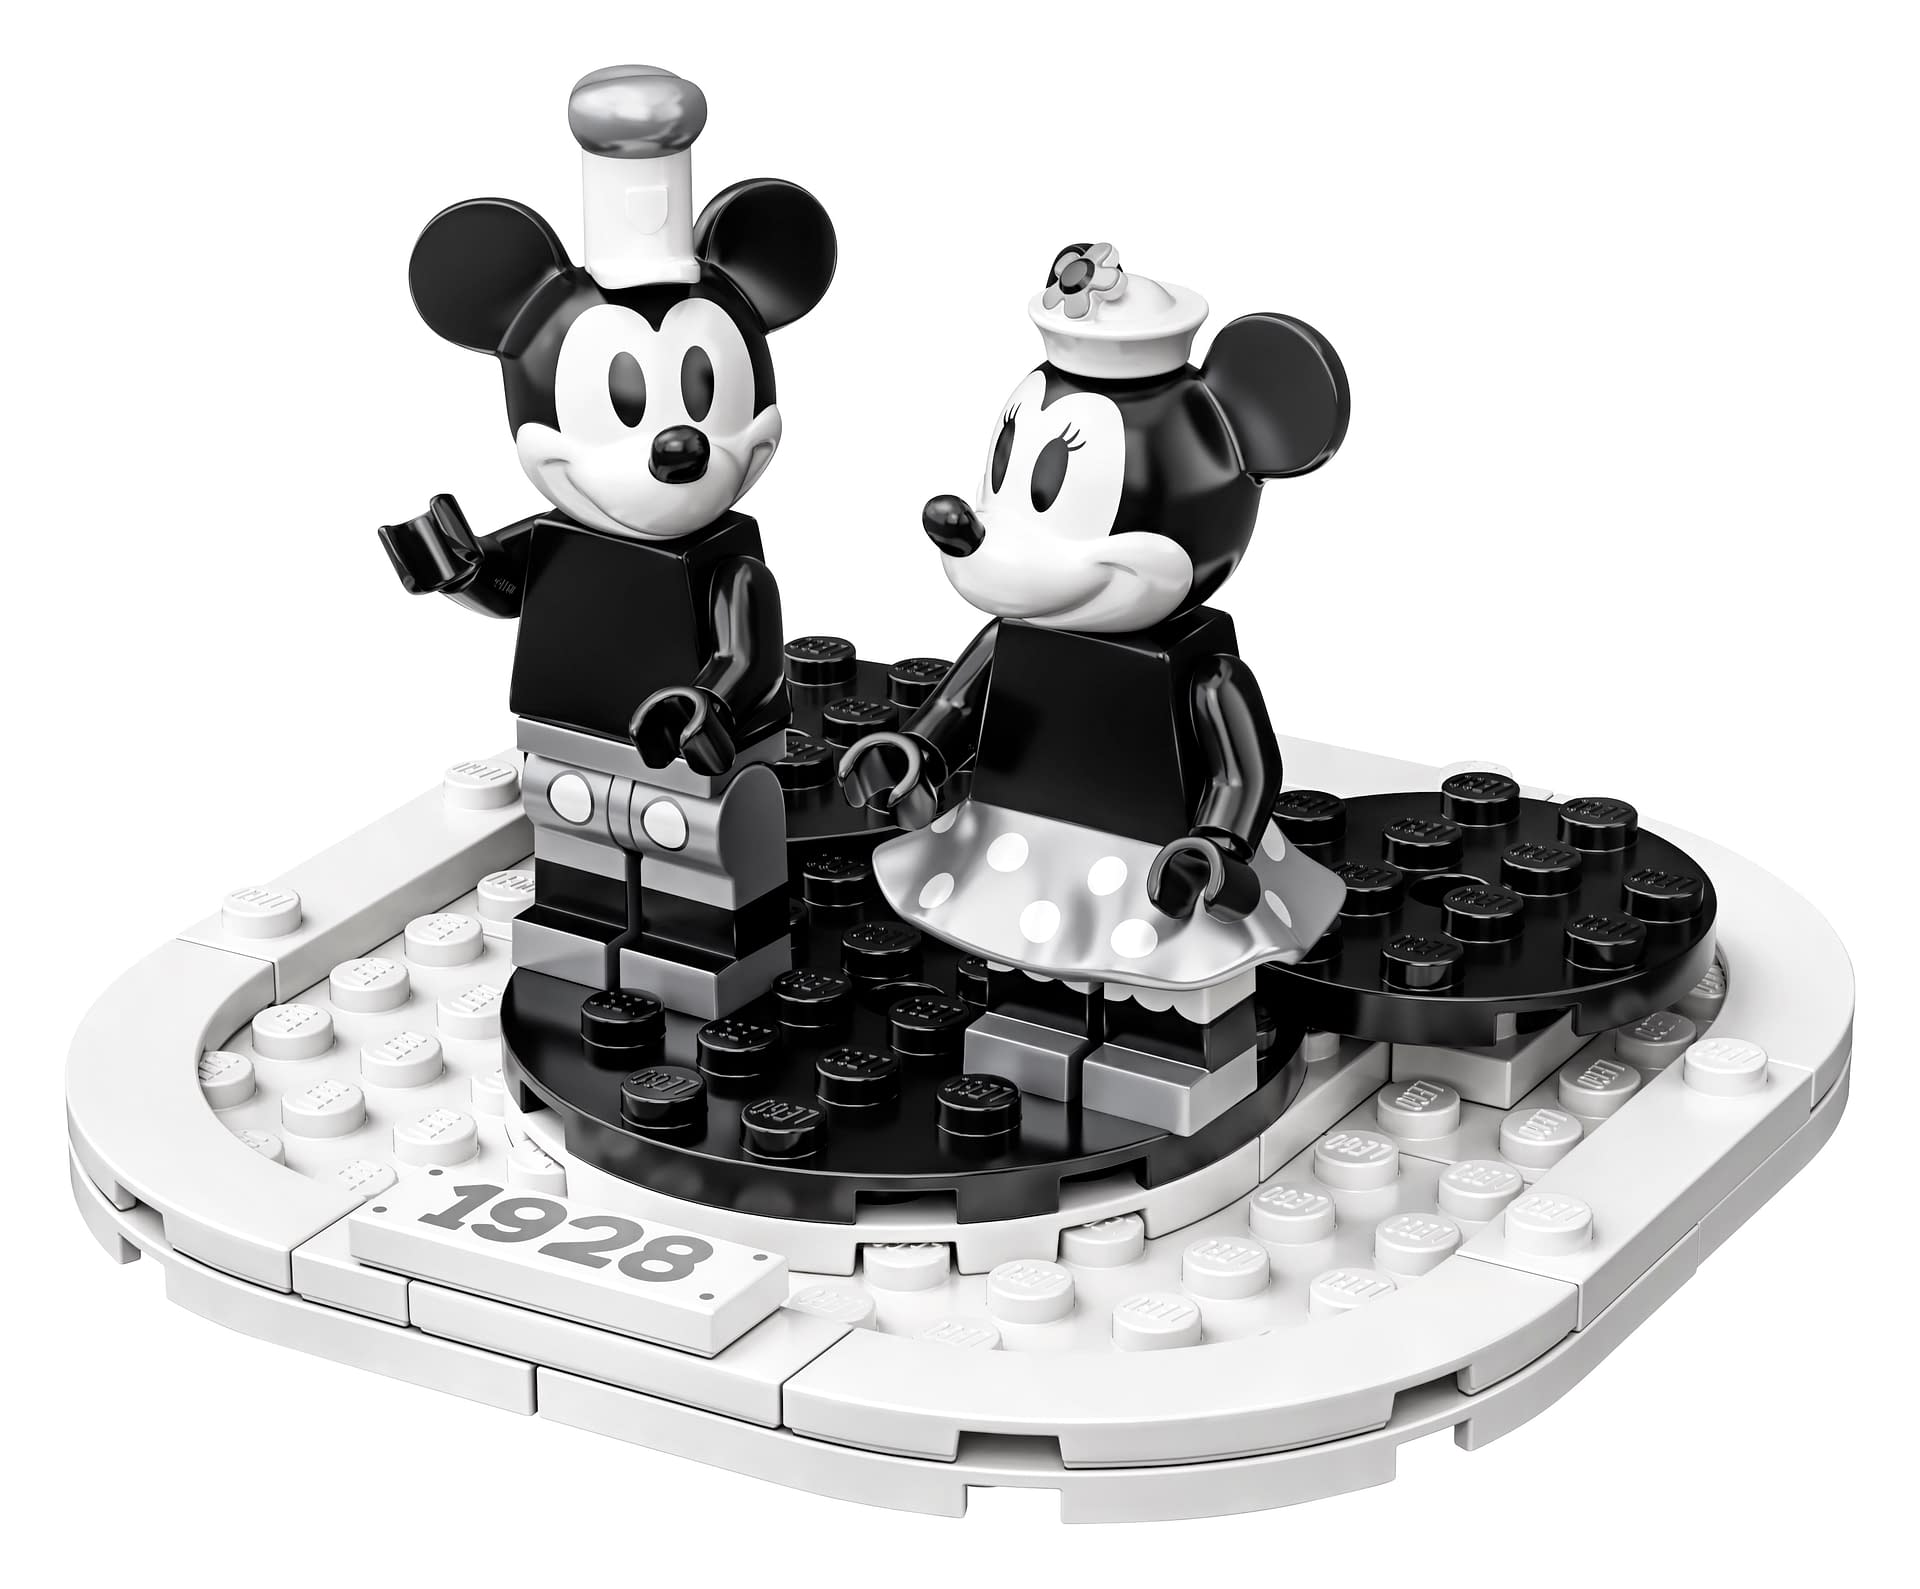 LEGO Ideas Steamboat Willie Mickey and Minnie Mouse Set 5